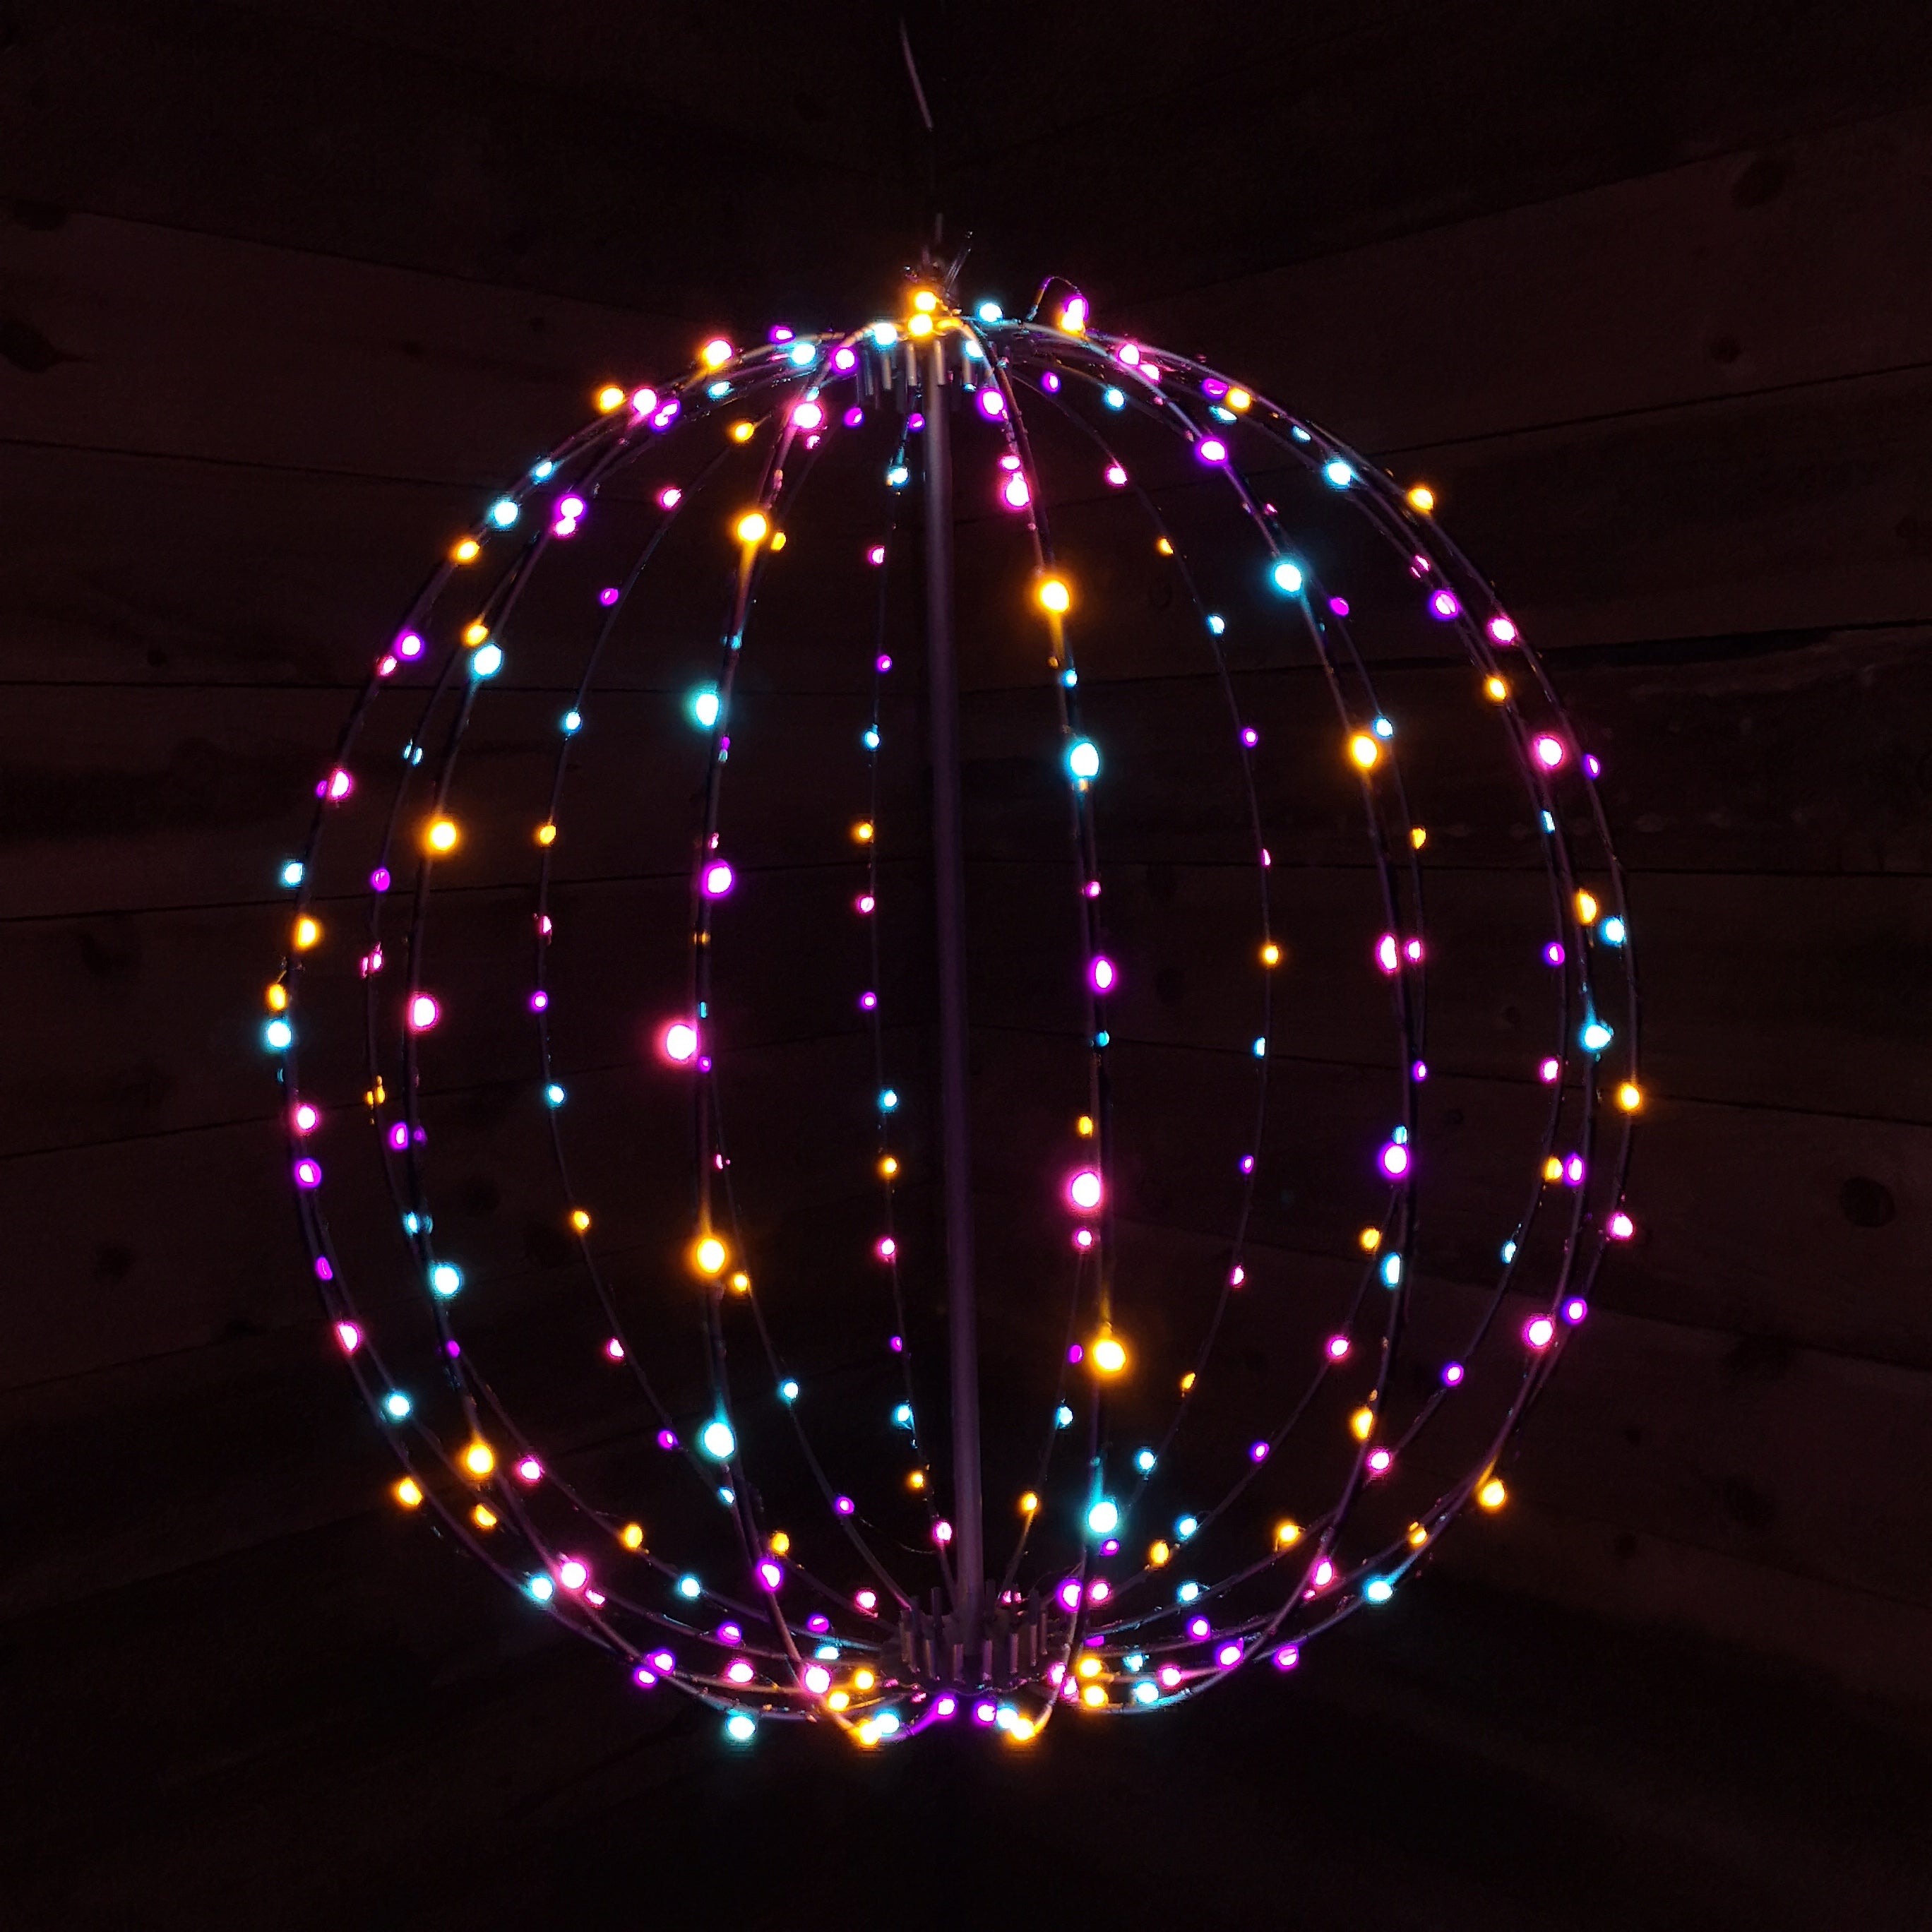 40cm Black Metal Frame Ball Christmas Decoration with 240 in Rainbow LED